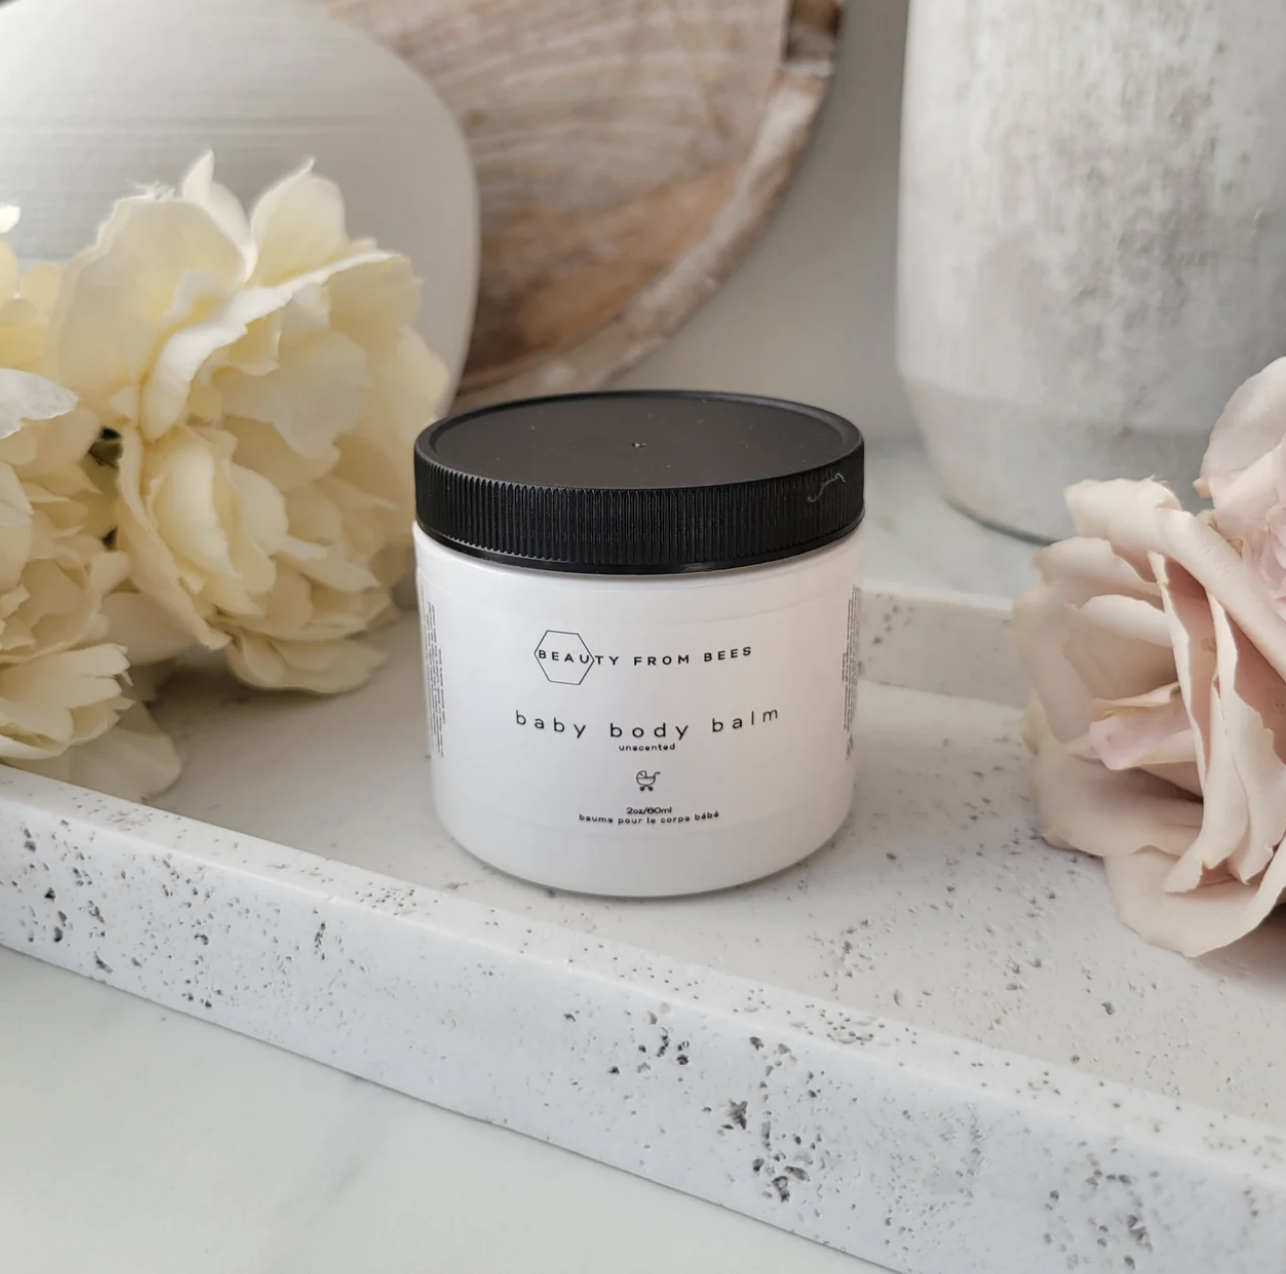 Baby Body Balm - Beauty From Bees